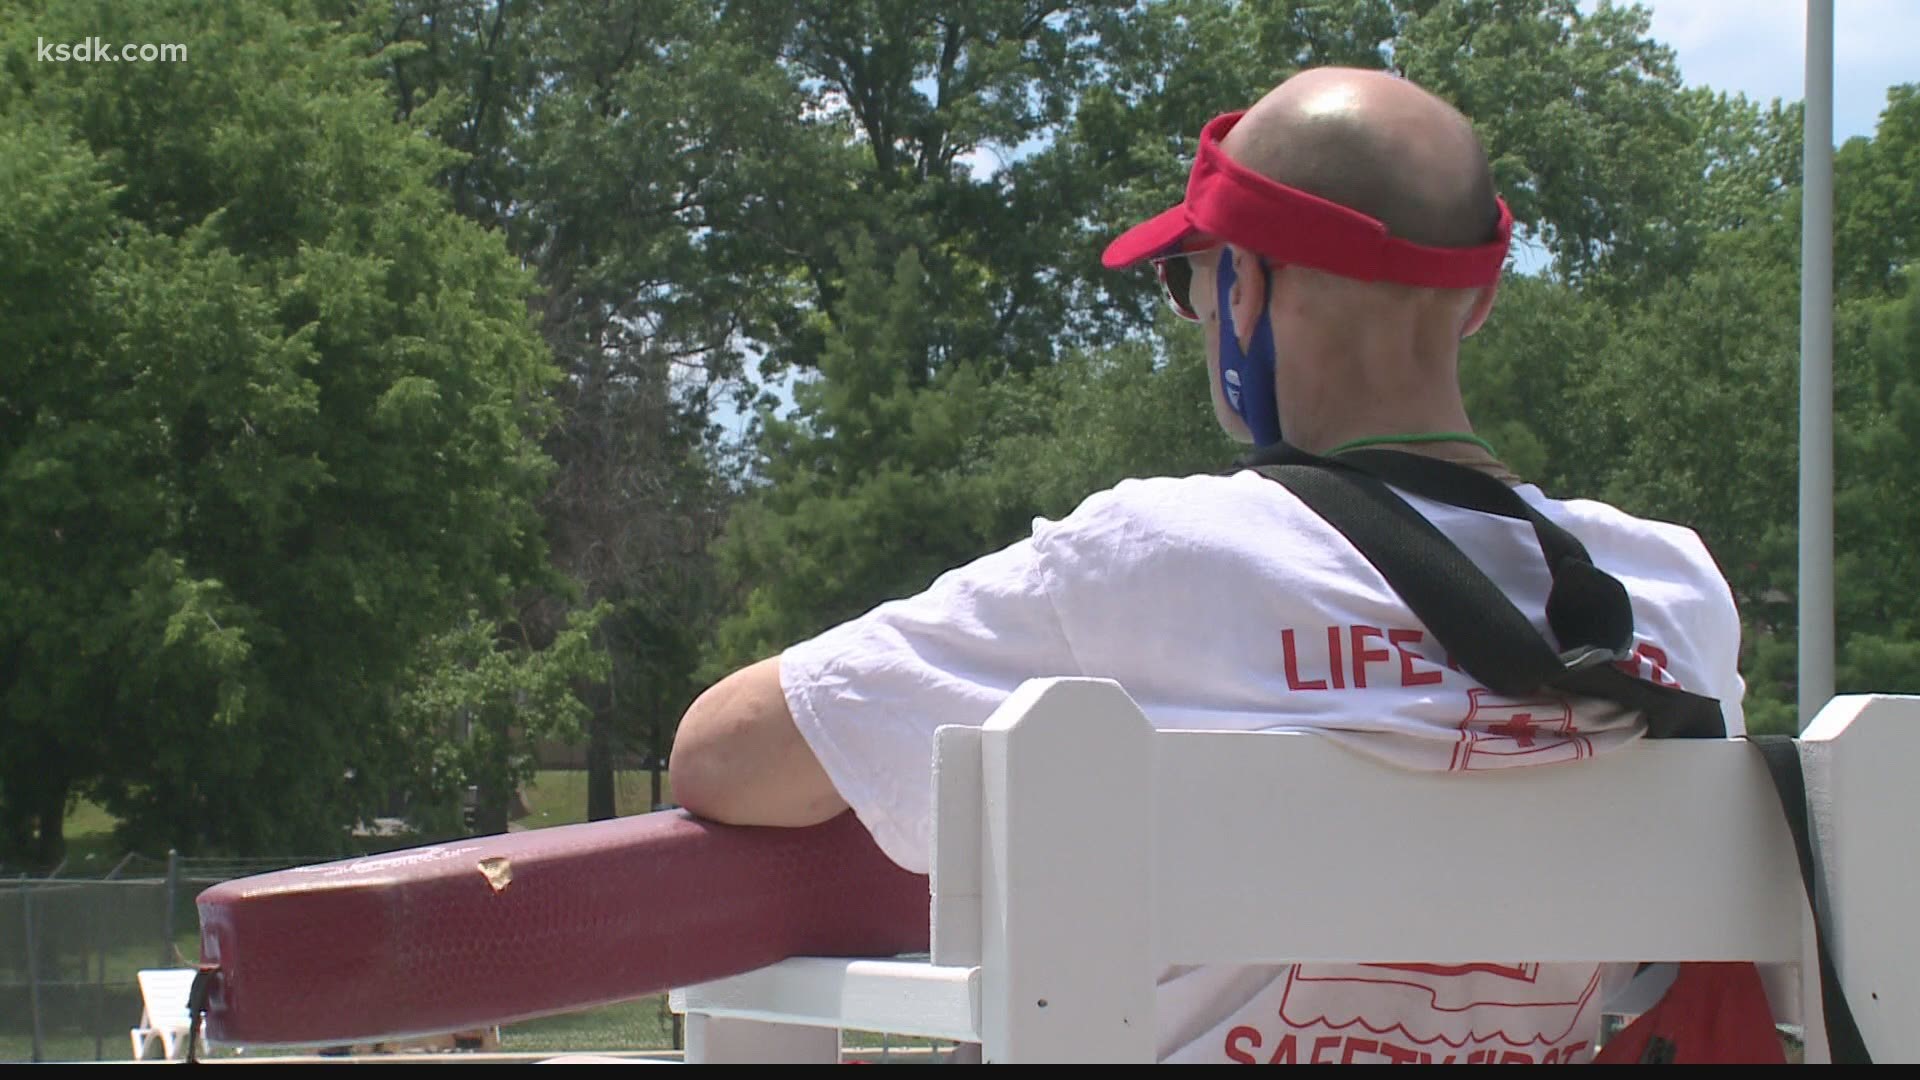 Shortage of lifeguards kept the pools closed for the first few weeks of the summer season